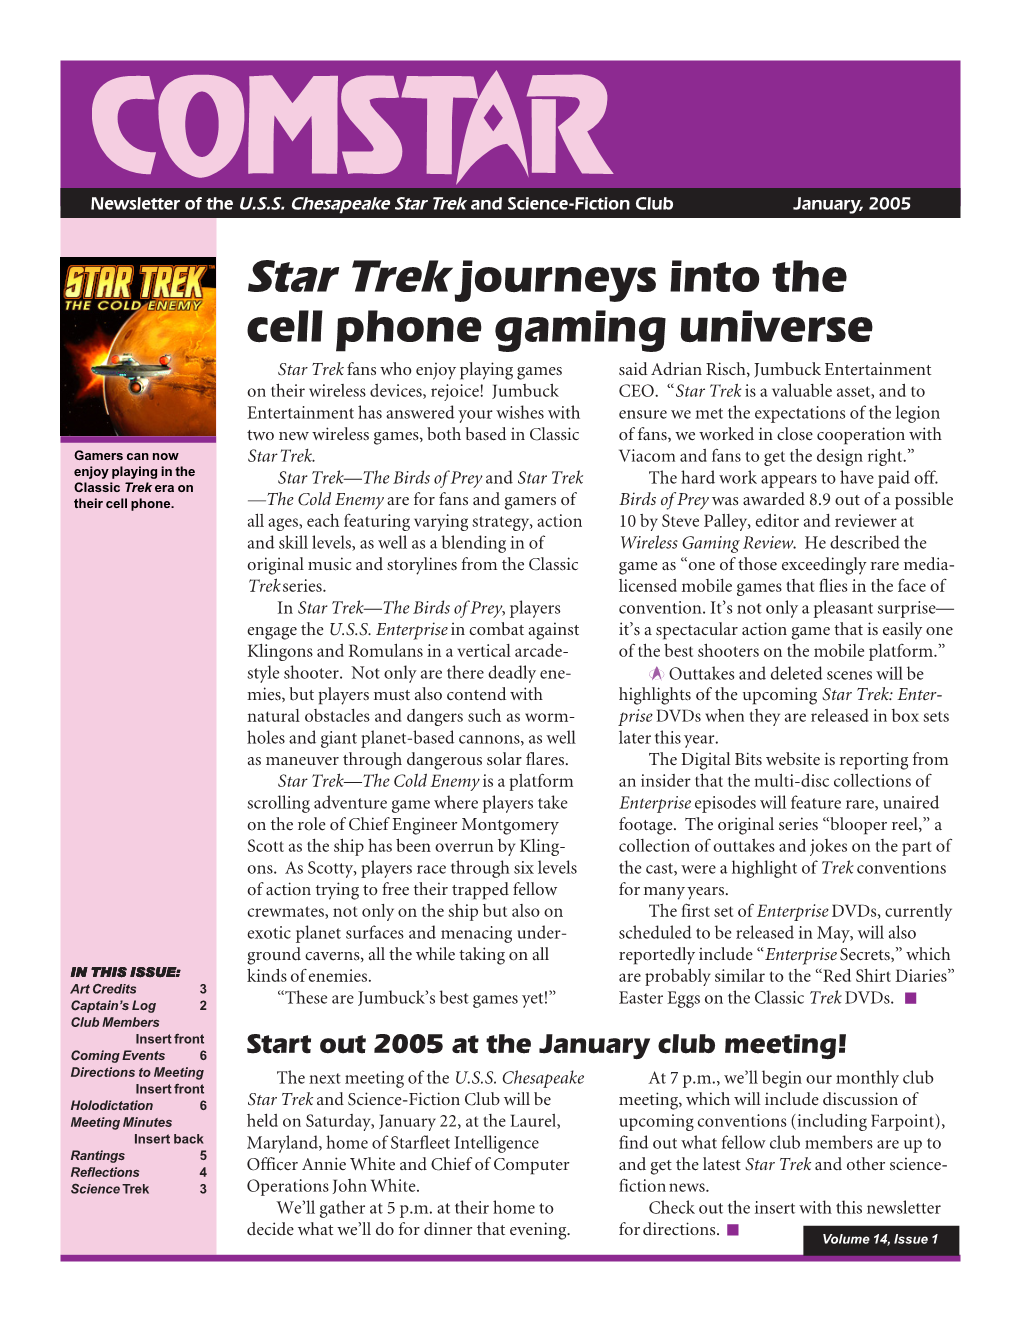 Star Trek Journeys Into the Cell Phone Gaming Universe